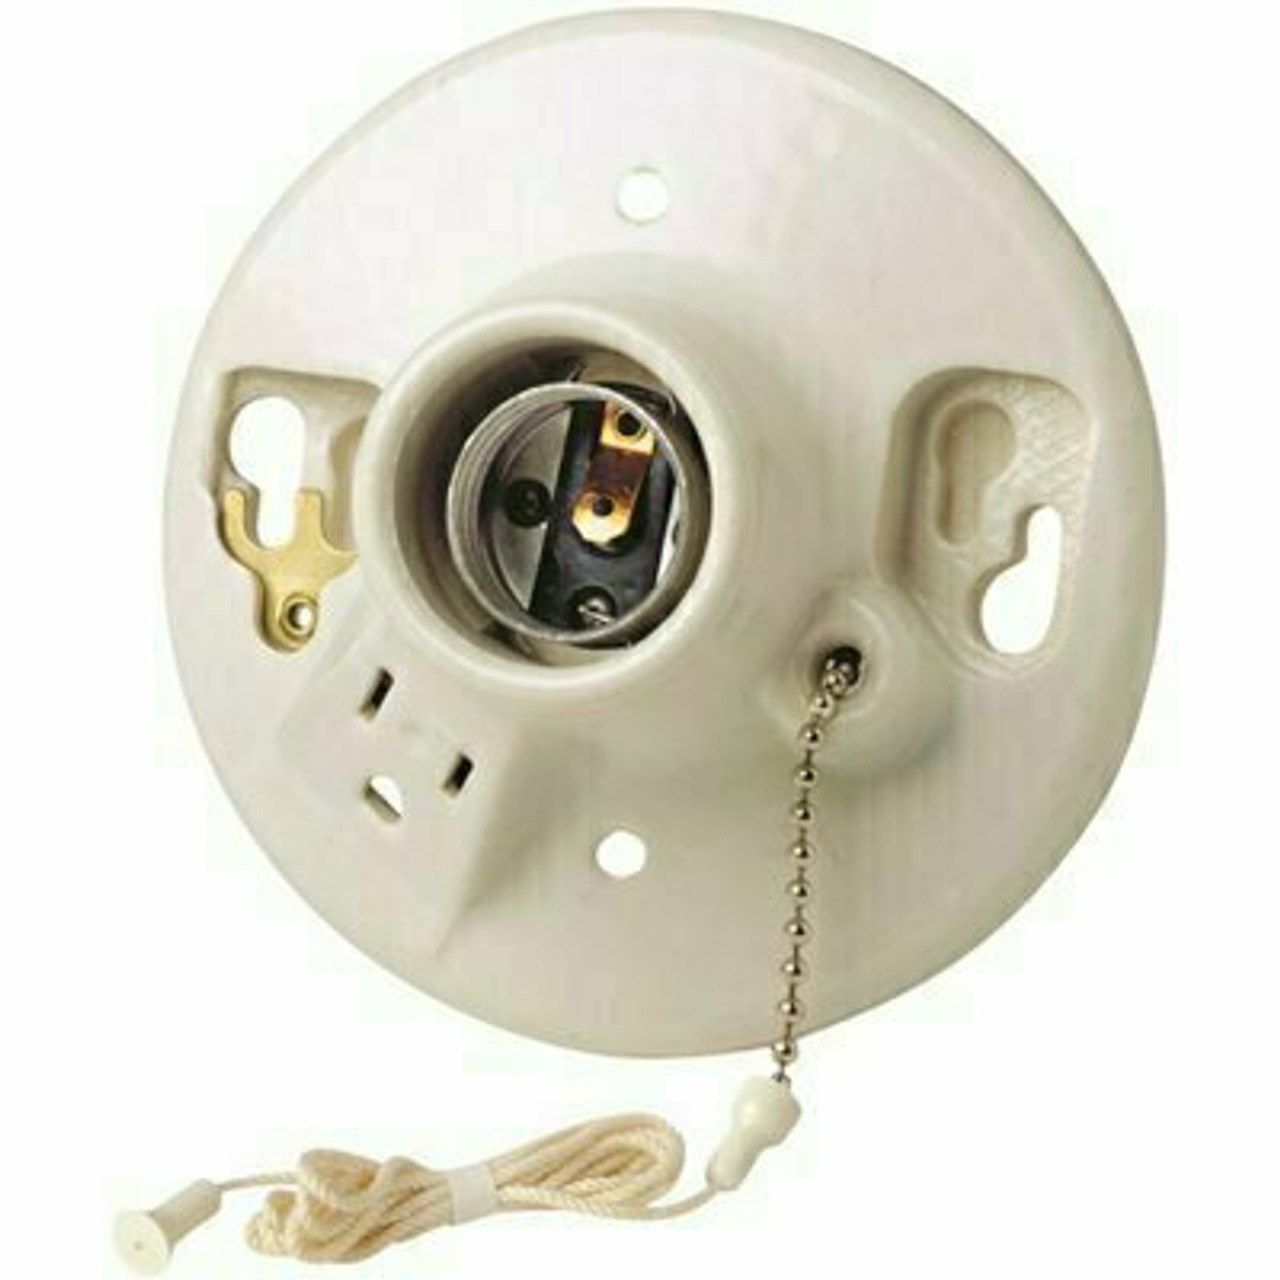 Leviton Glazed Porcelain Lamp Holder With Pull Chain And Outlet